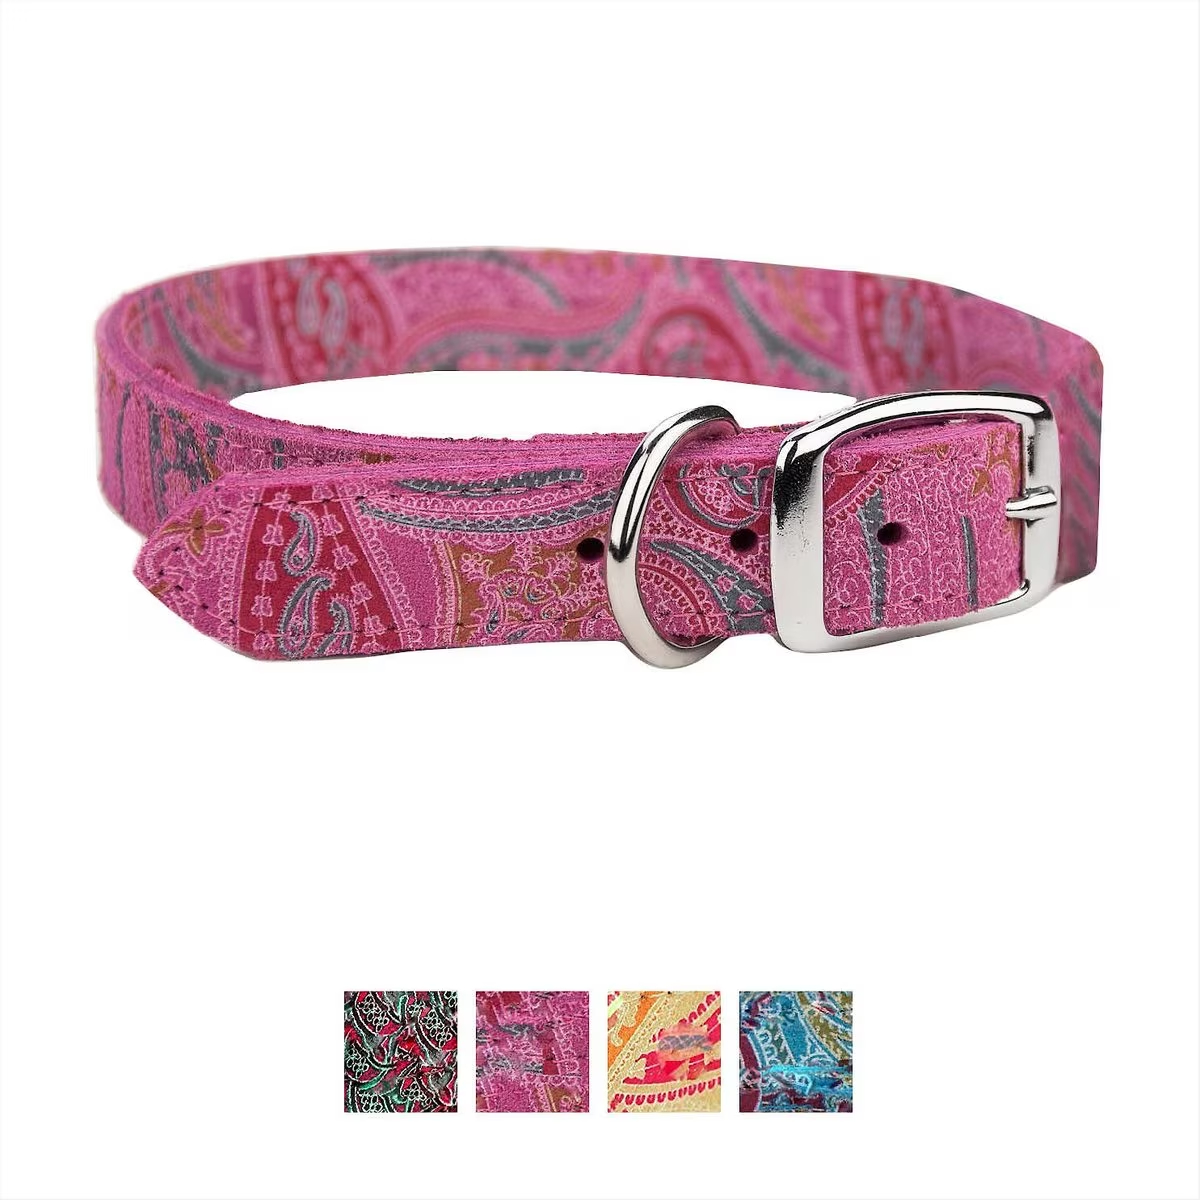 OmniPet Paisley Leather Dog Collar